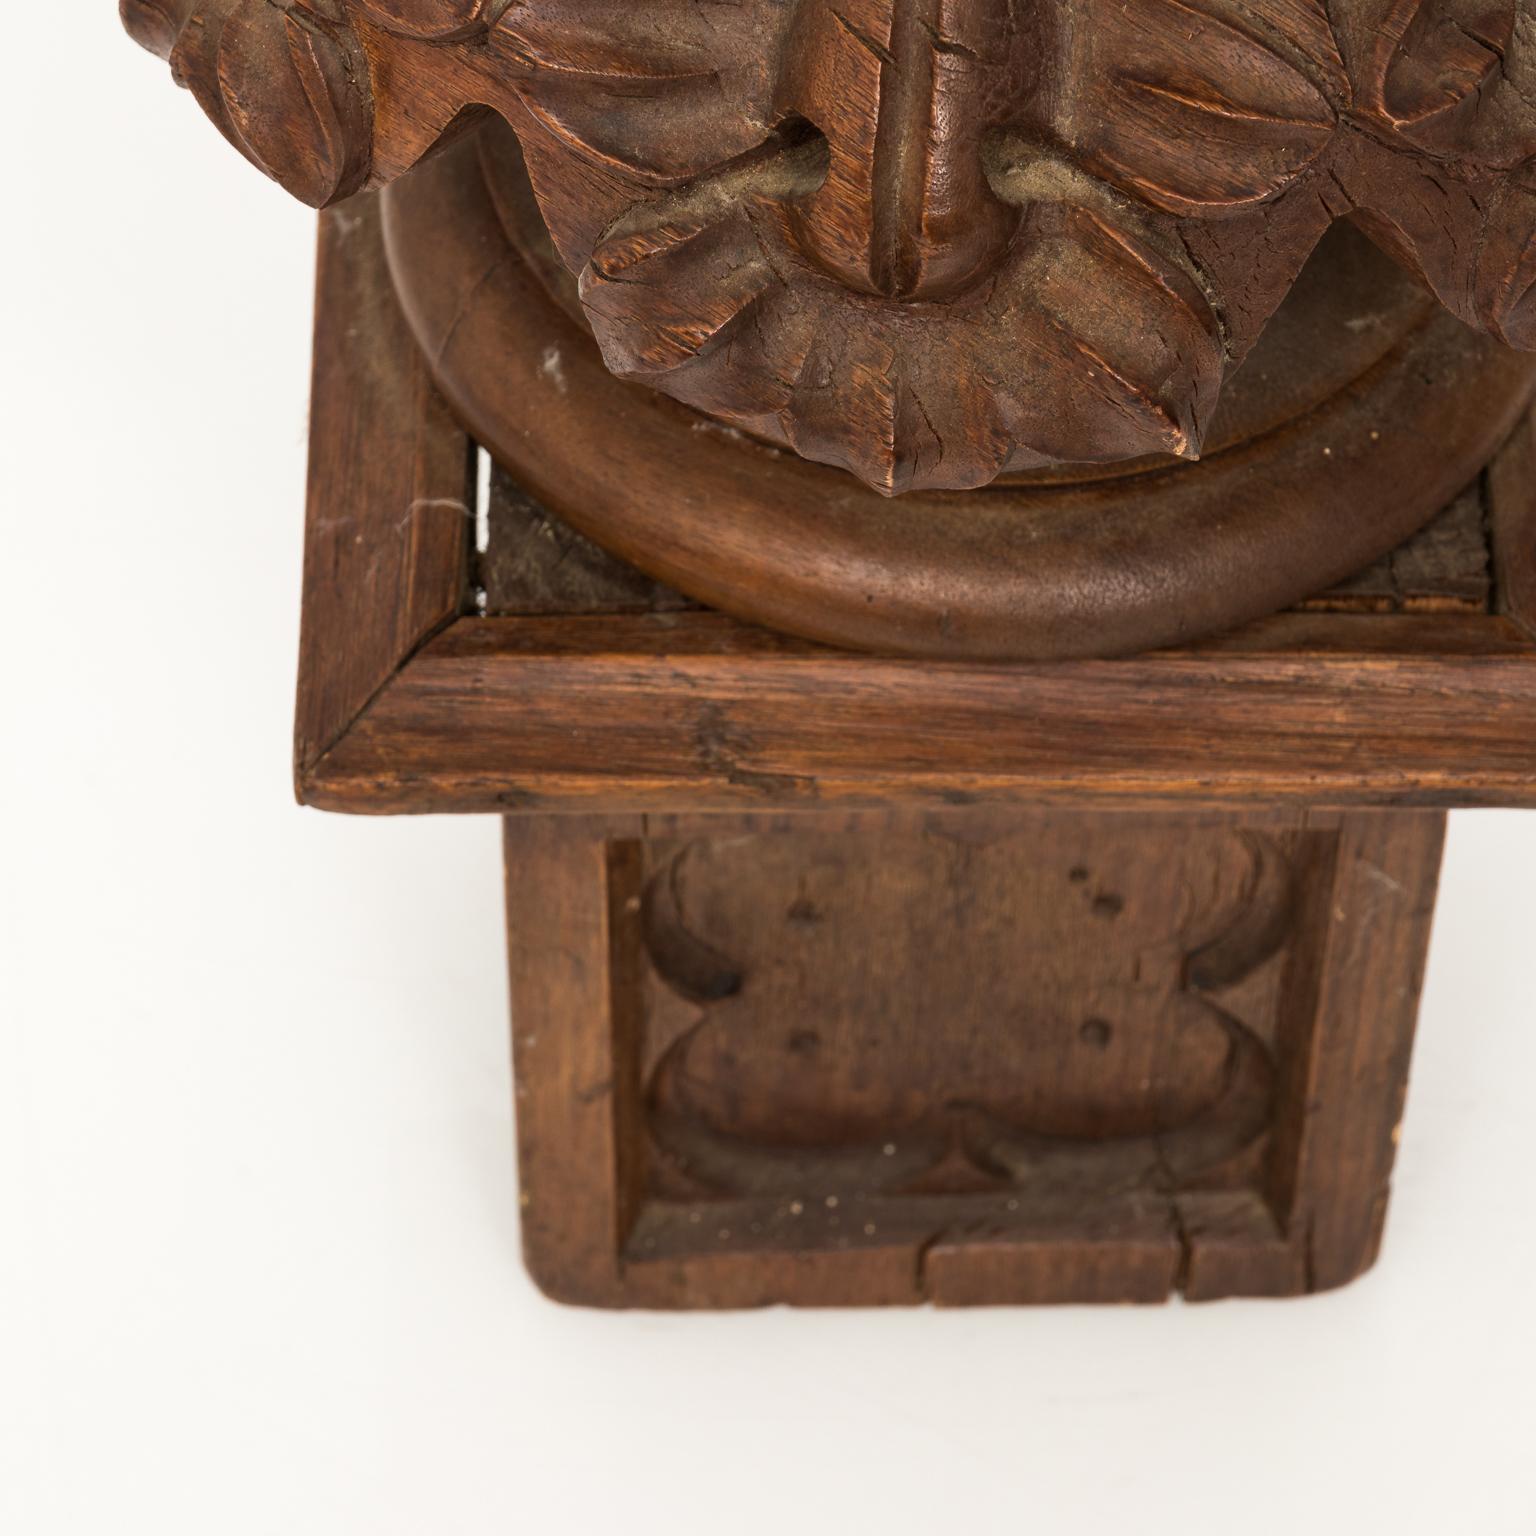 Pair of early 19th century carved walnut finials with leaf motif, and square bases featuring quatrefoil motifs. These finials most likely were part of a wooden staircase railing or newel post. Cracks and small chips through out both pieces. Original